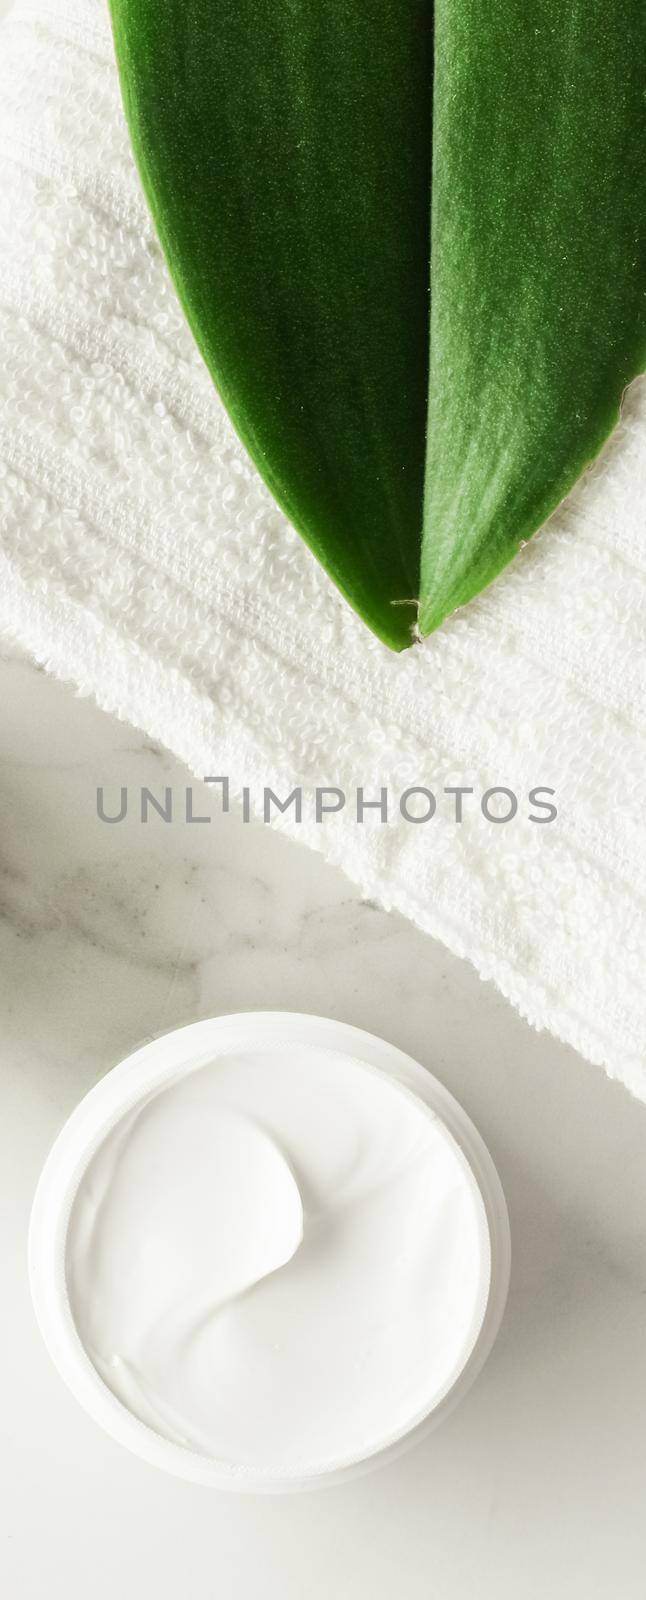 Beauty of an organic spa experience by Anneleven